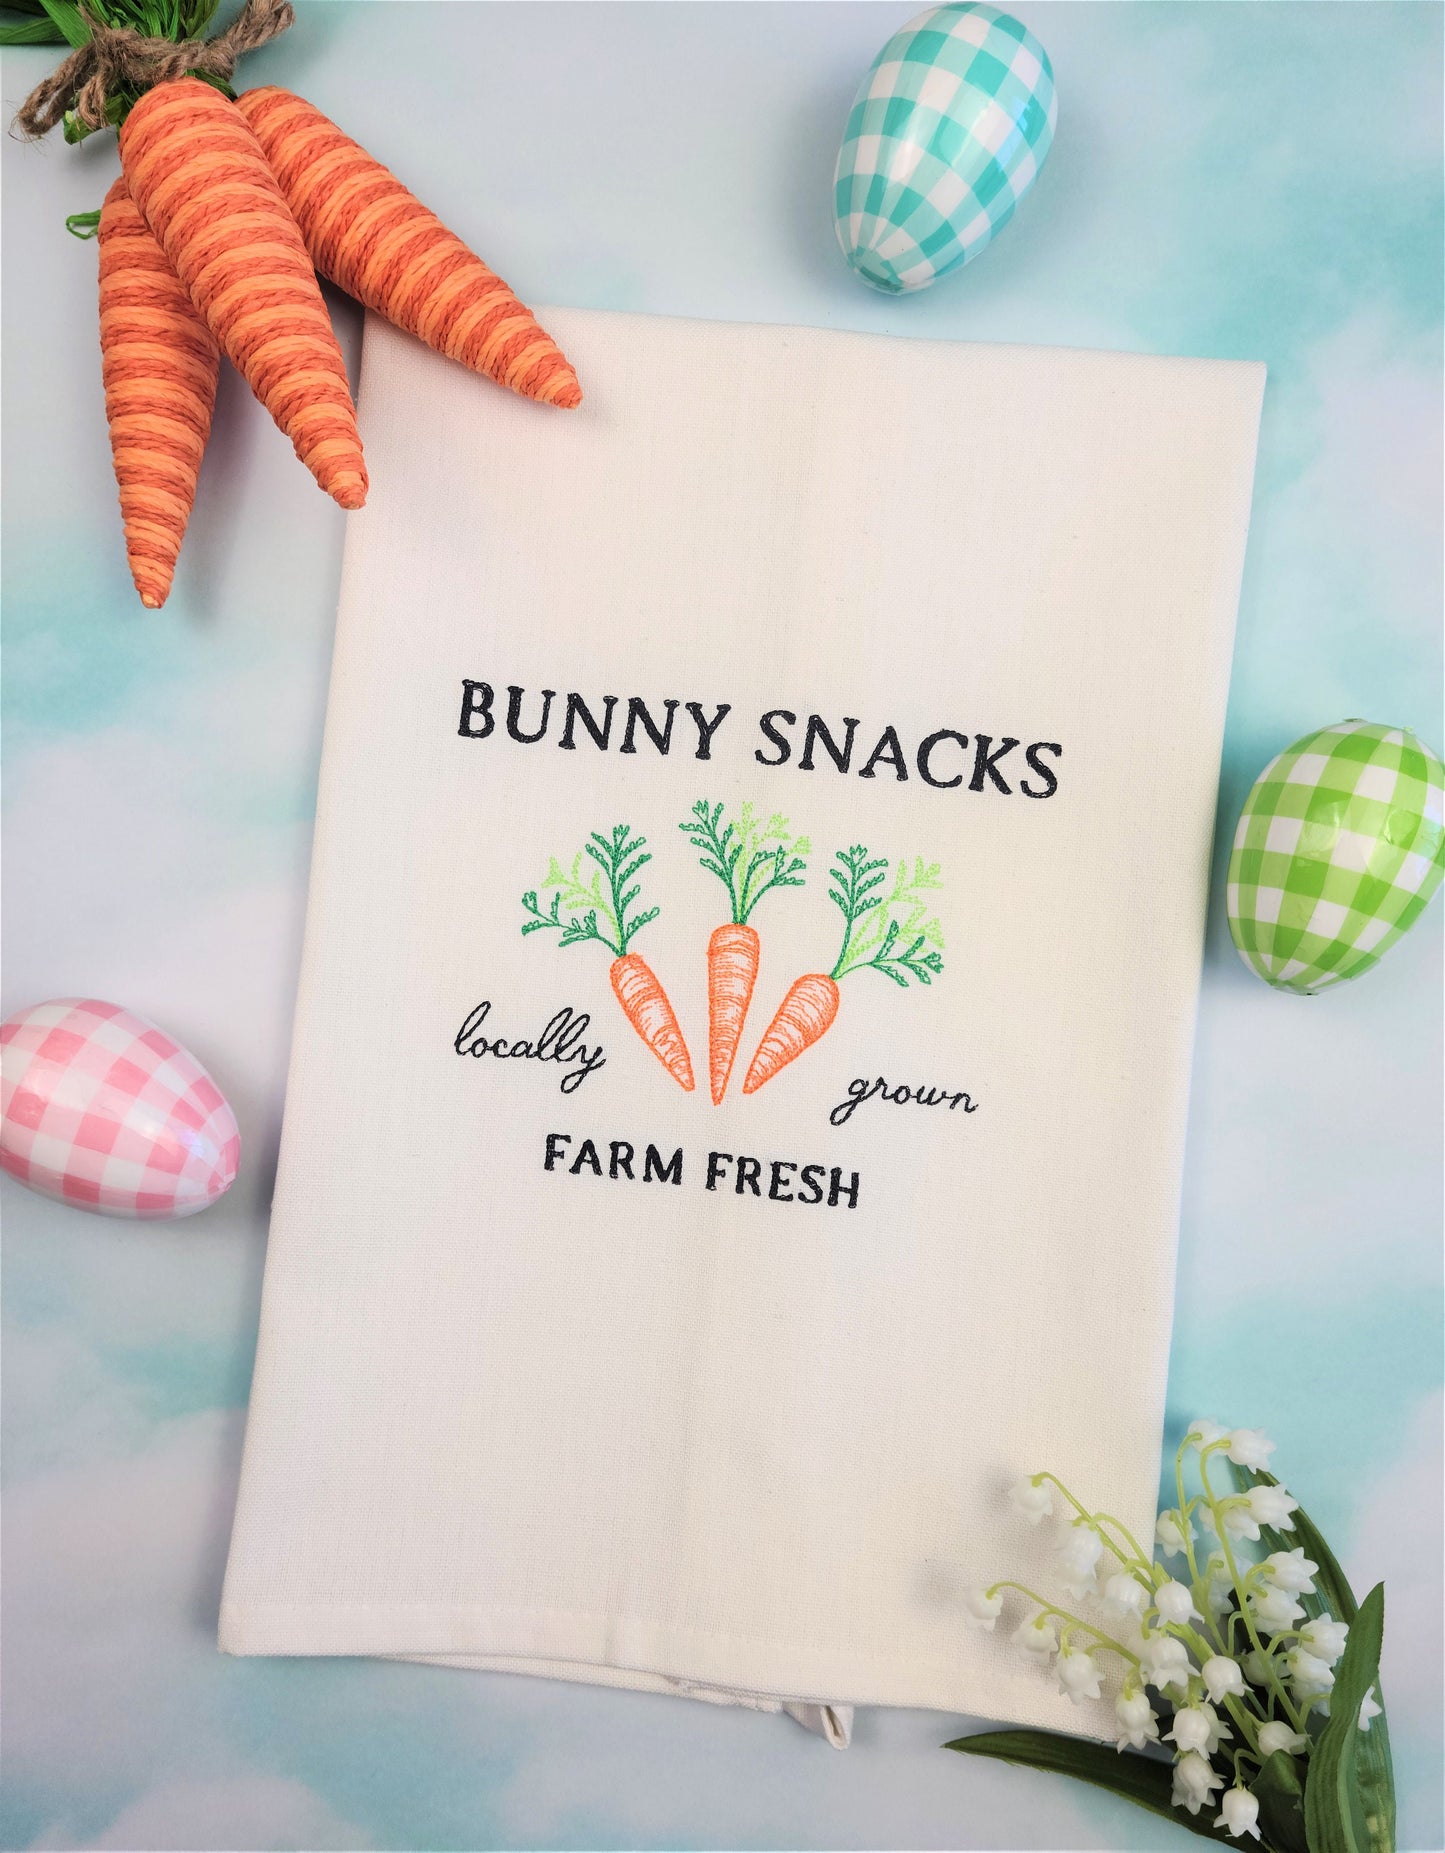 Set of 2 Tea Towels | Bunny Snacks and Chick-Inn Embroidered Kitchen Tea Towels